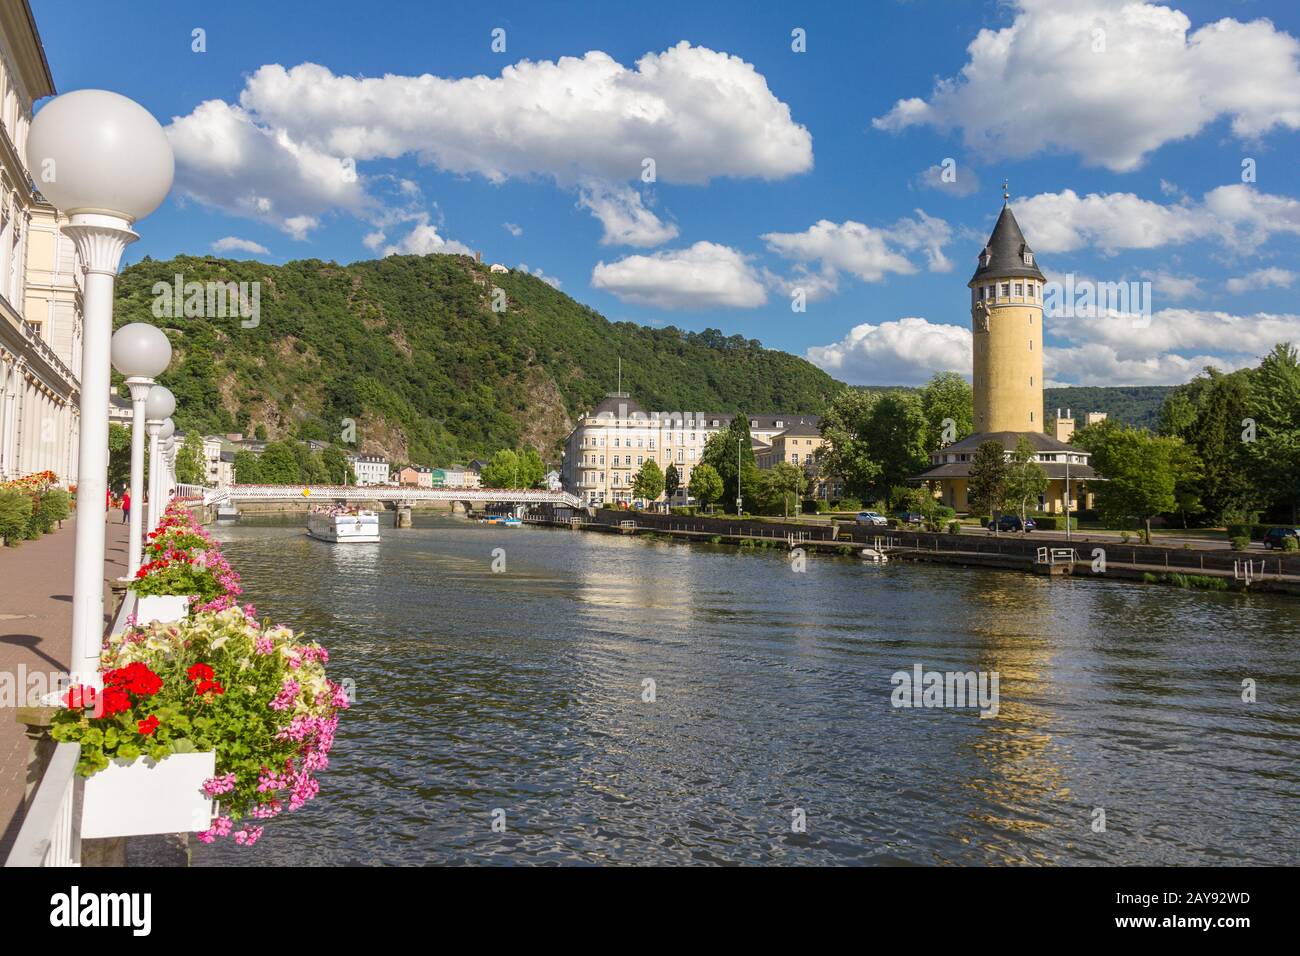 View of the spa town Bad Ems at the river Lahn in Germany Stock Photo